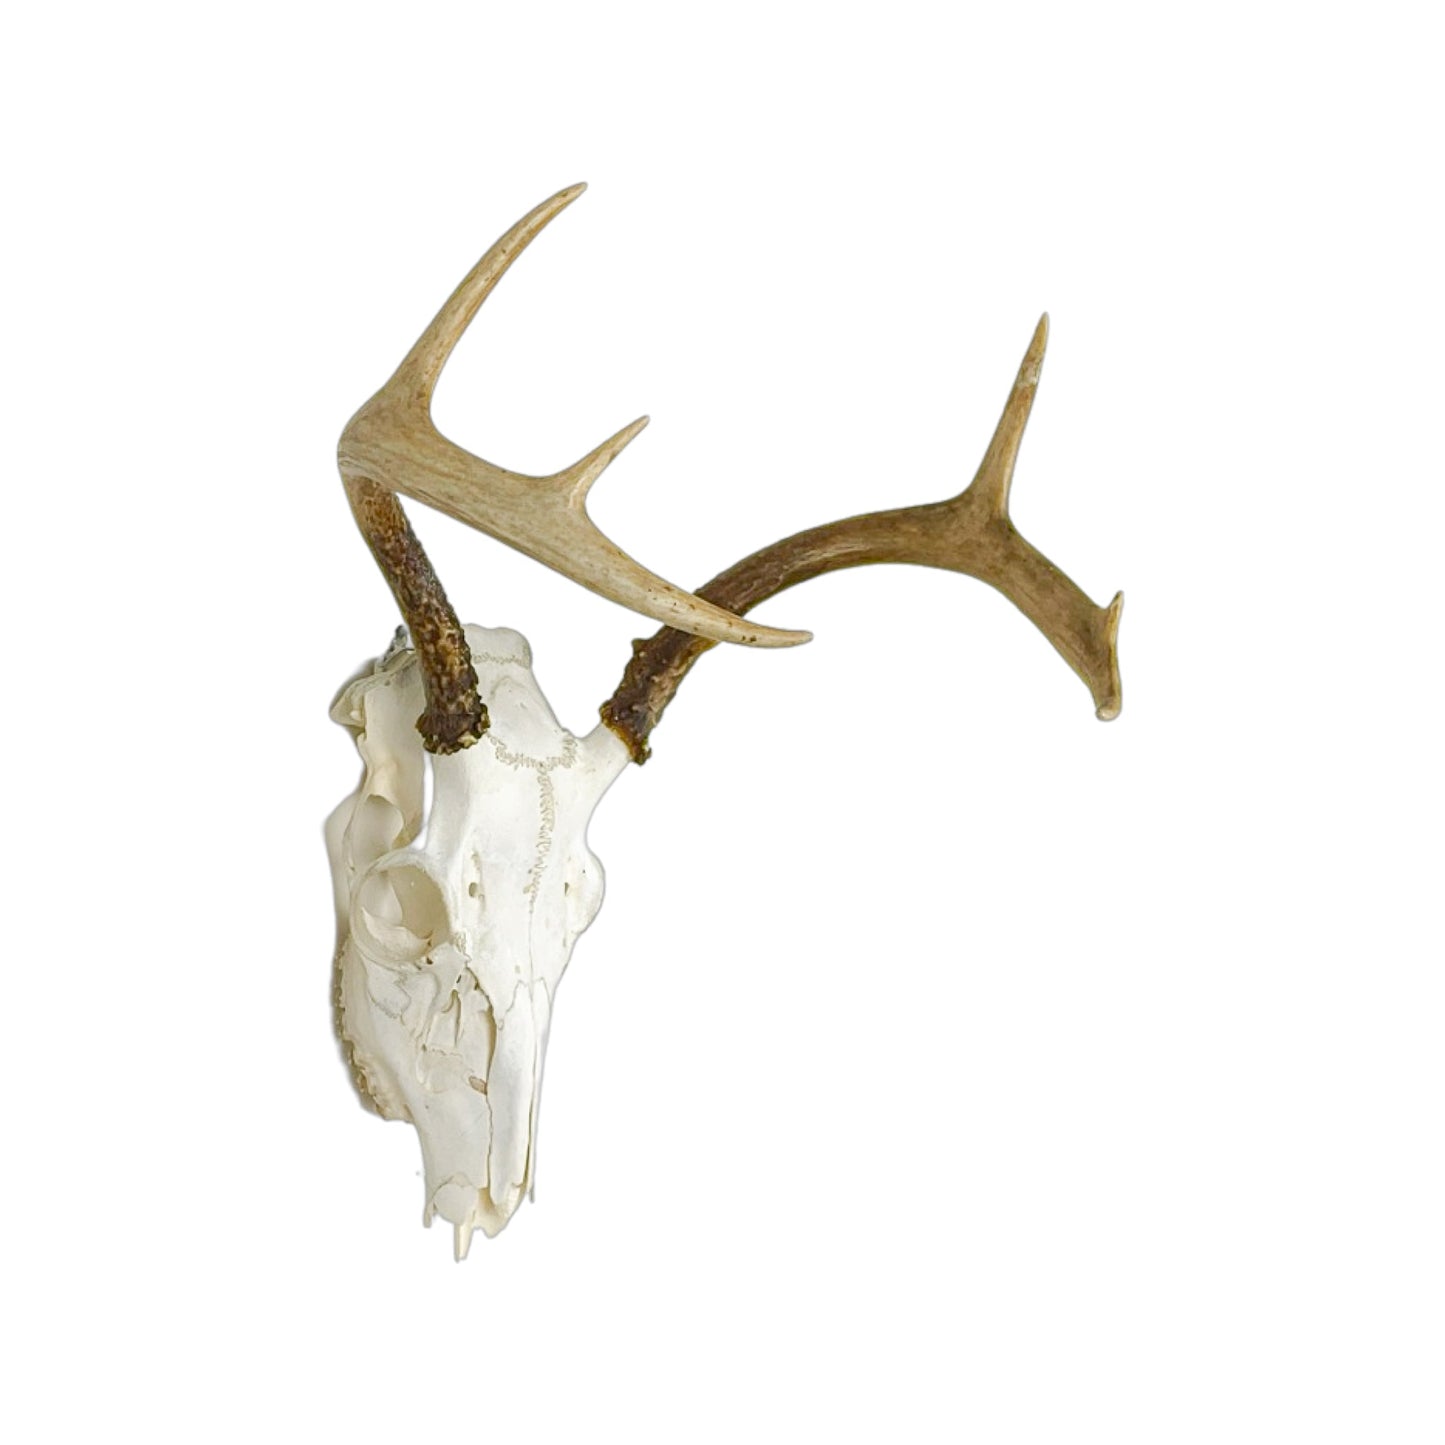 A Home Decor Taxidermy White-Tailed Deer European Skull of Grade Inferior